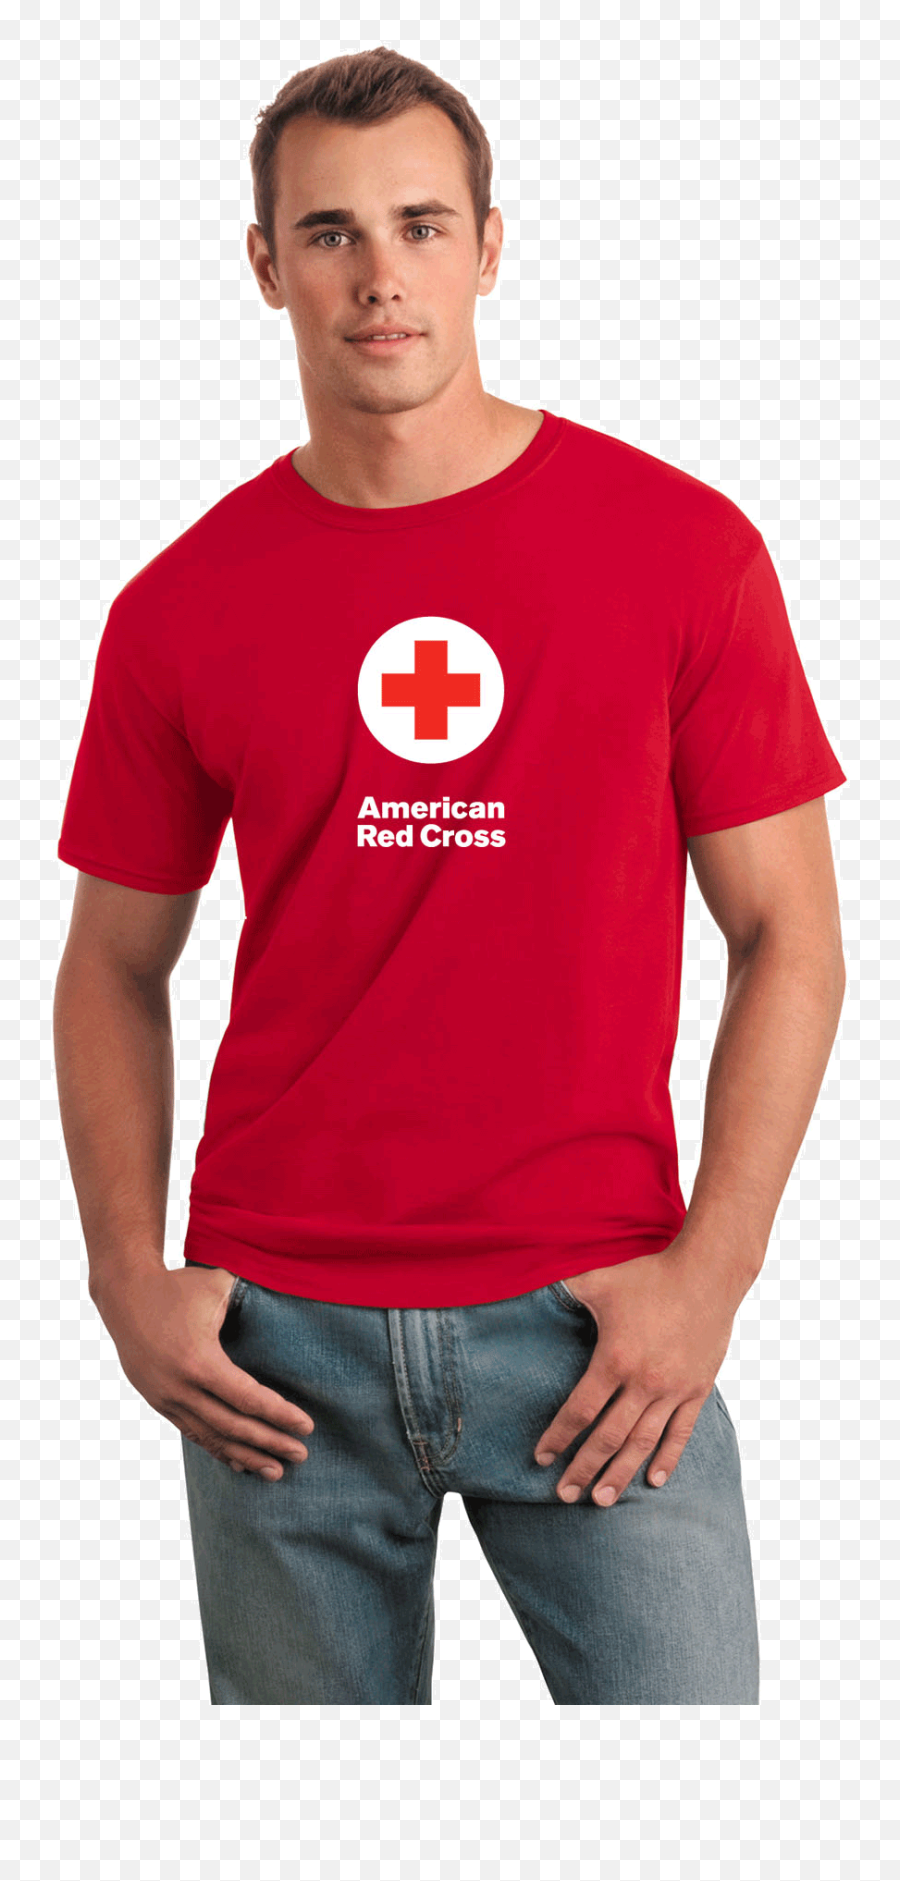 Unisex 100 Cotton Classic T - Shirt With American Red Cross Logo Model In A Red Shirt Emoji,Red Logo